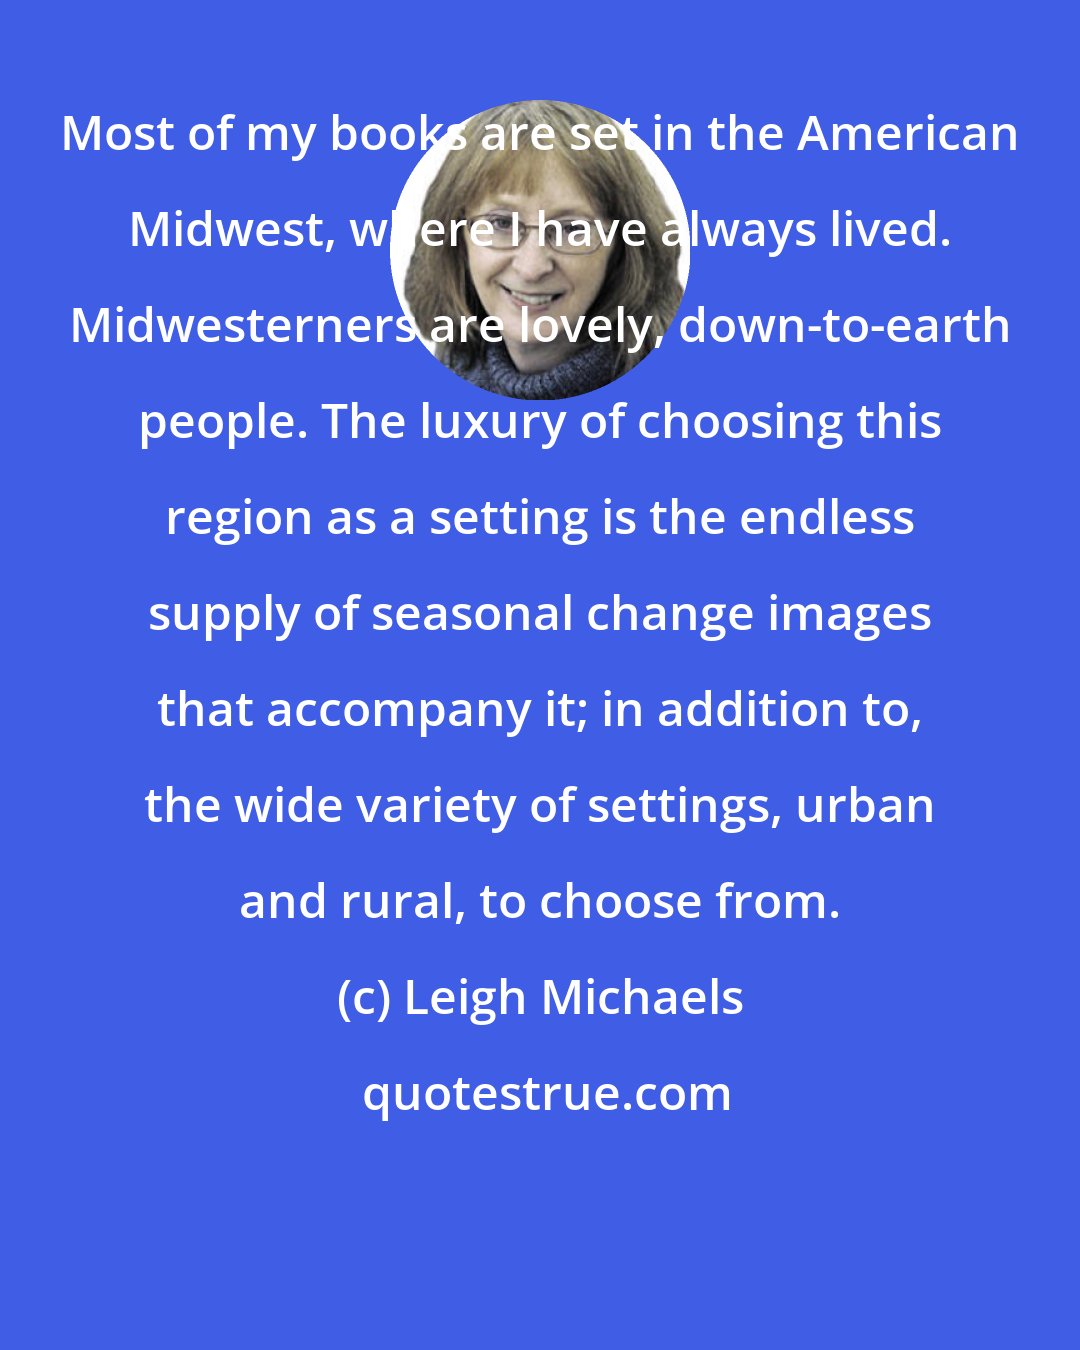 Leigh Michaels: Most of my books are set in the American Midwest, where I have always lived. Midwesterners are lovely, down-to-earth people. The luxury of choosing this region as a setting is the endless supply of seasonal change images that accompany it; in addition to, the wide variety of settings, urban and rural, to choose from.